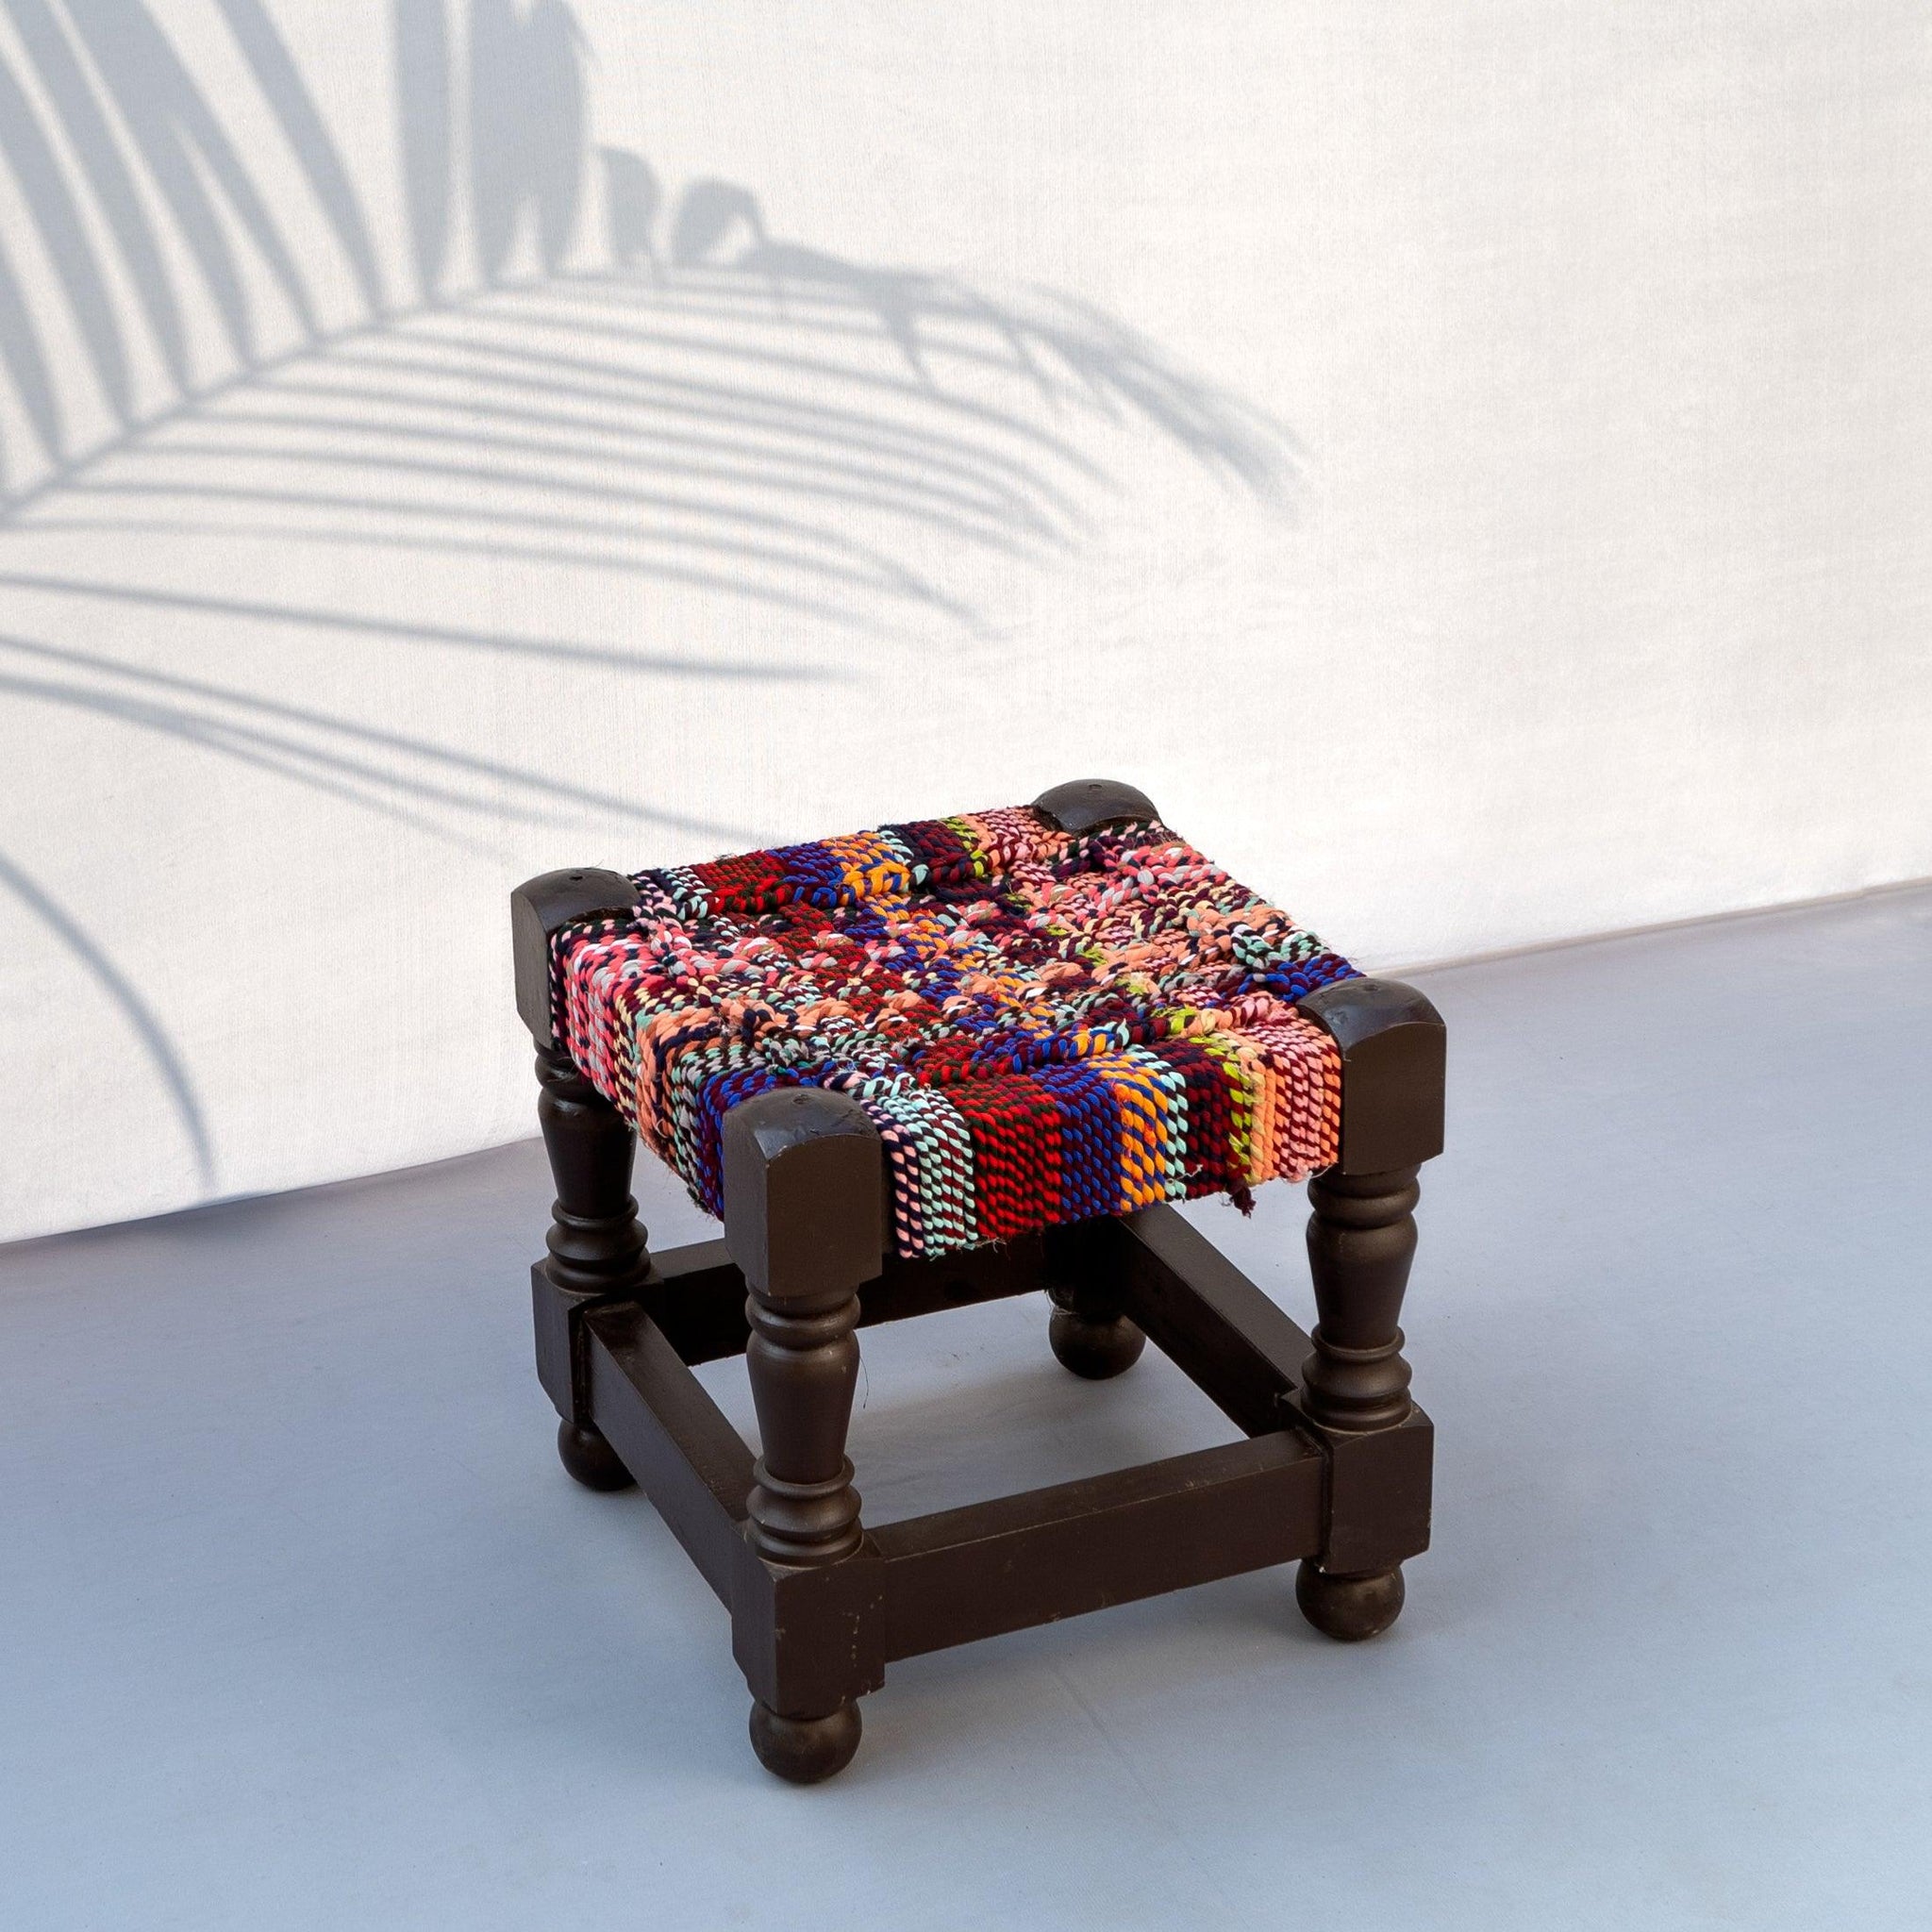 Chindi Textile Wooden Stool - Sirohi.org - Colour_Multi-Colour, Purpose_Outdoor Seating, Rope Material_Textile Waste